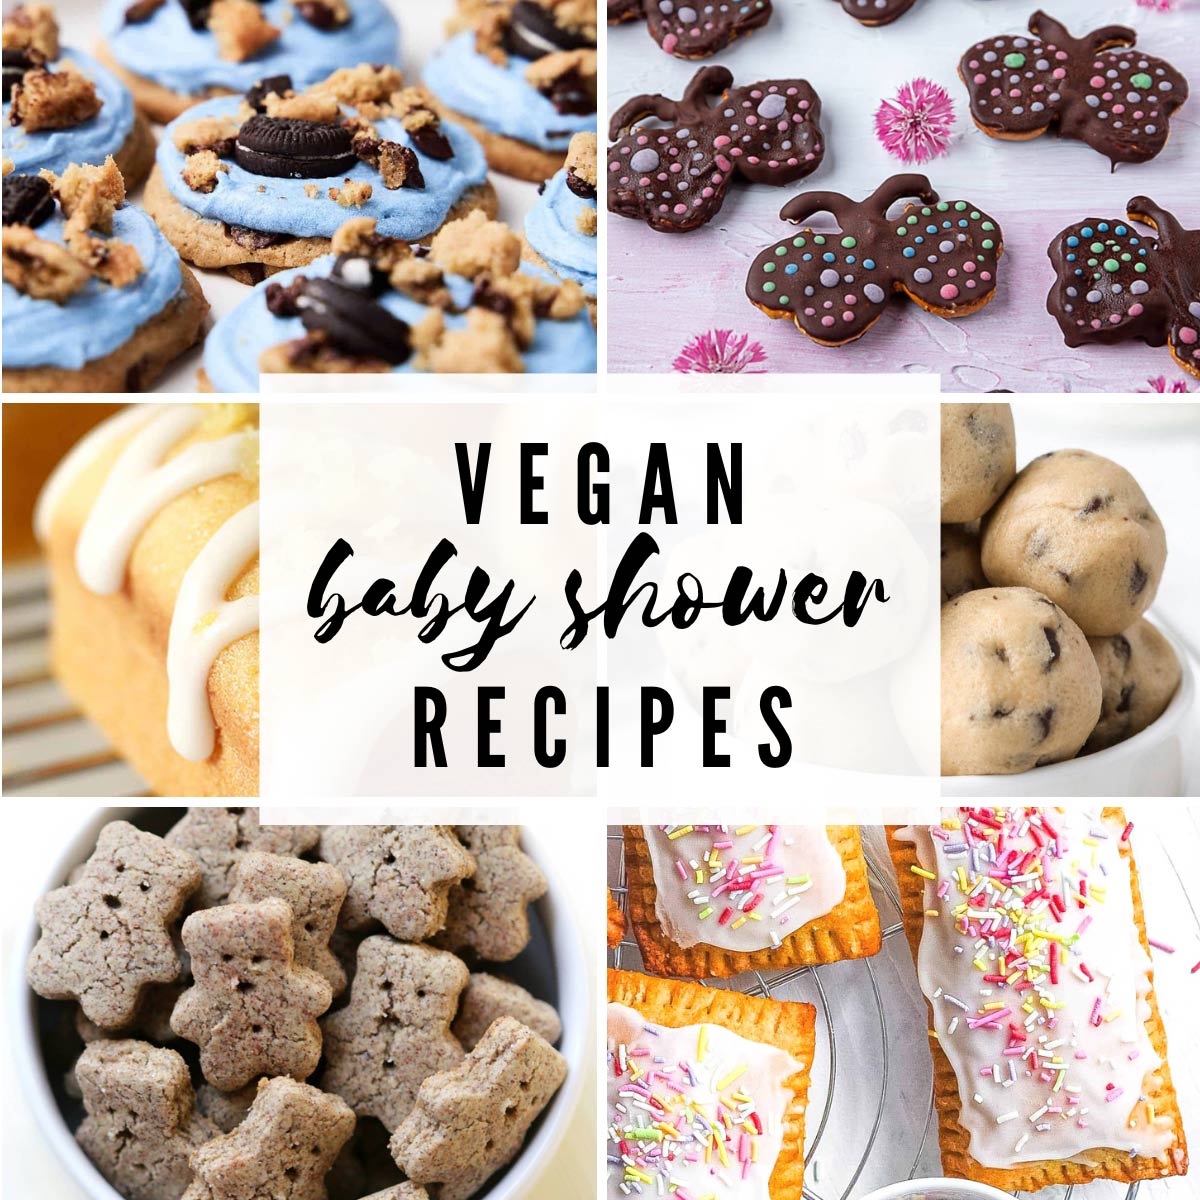 6 Images Of Vegan Baby Shower Recipes With Text Overlay